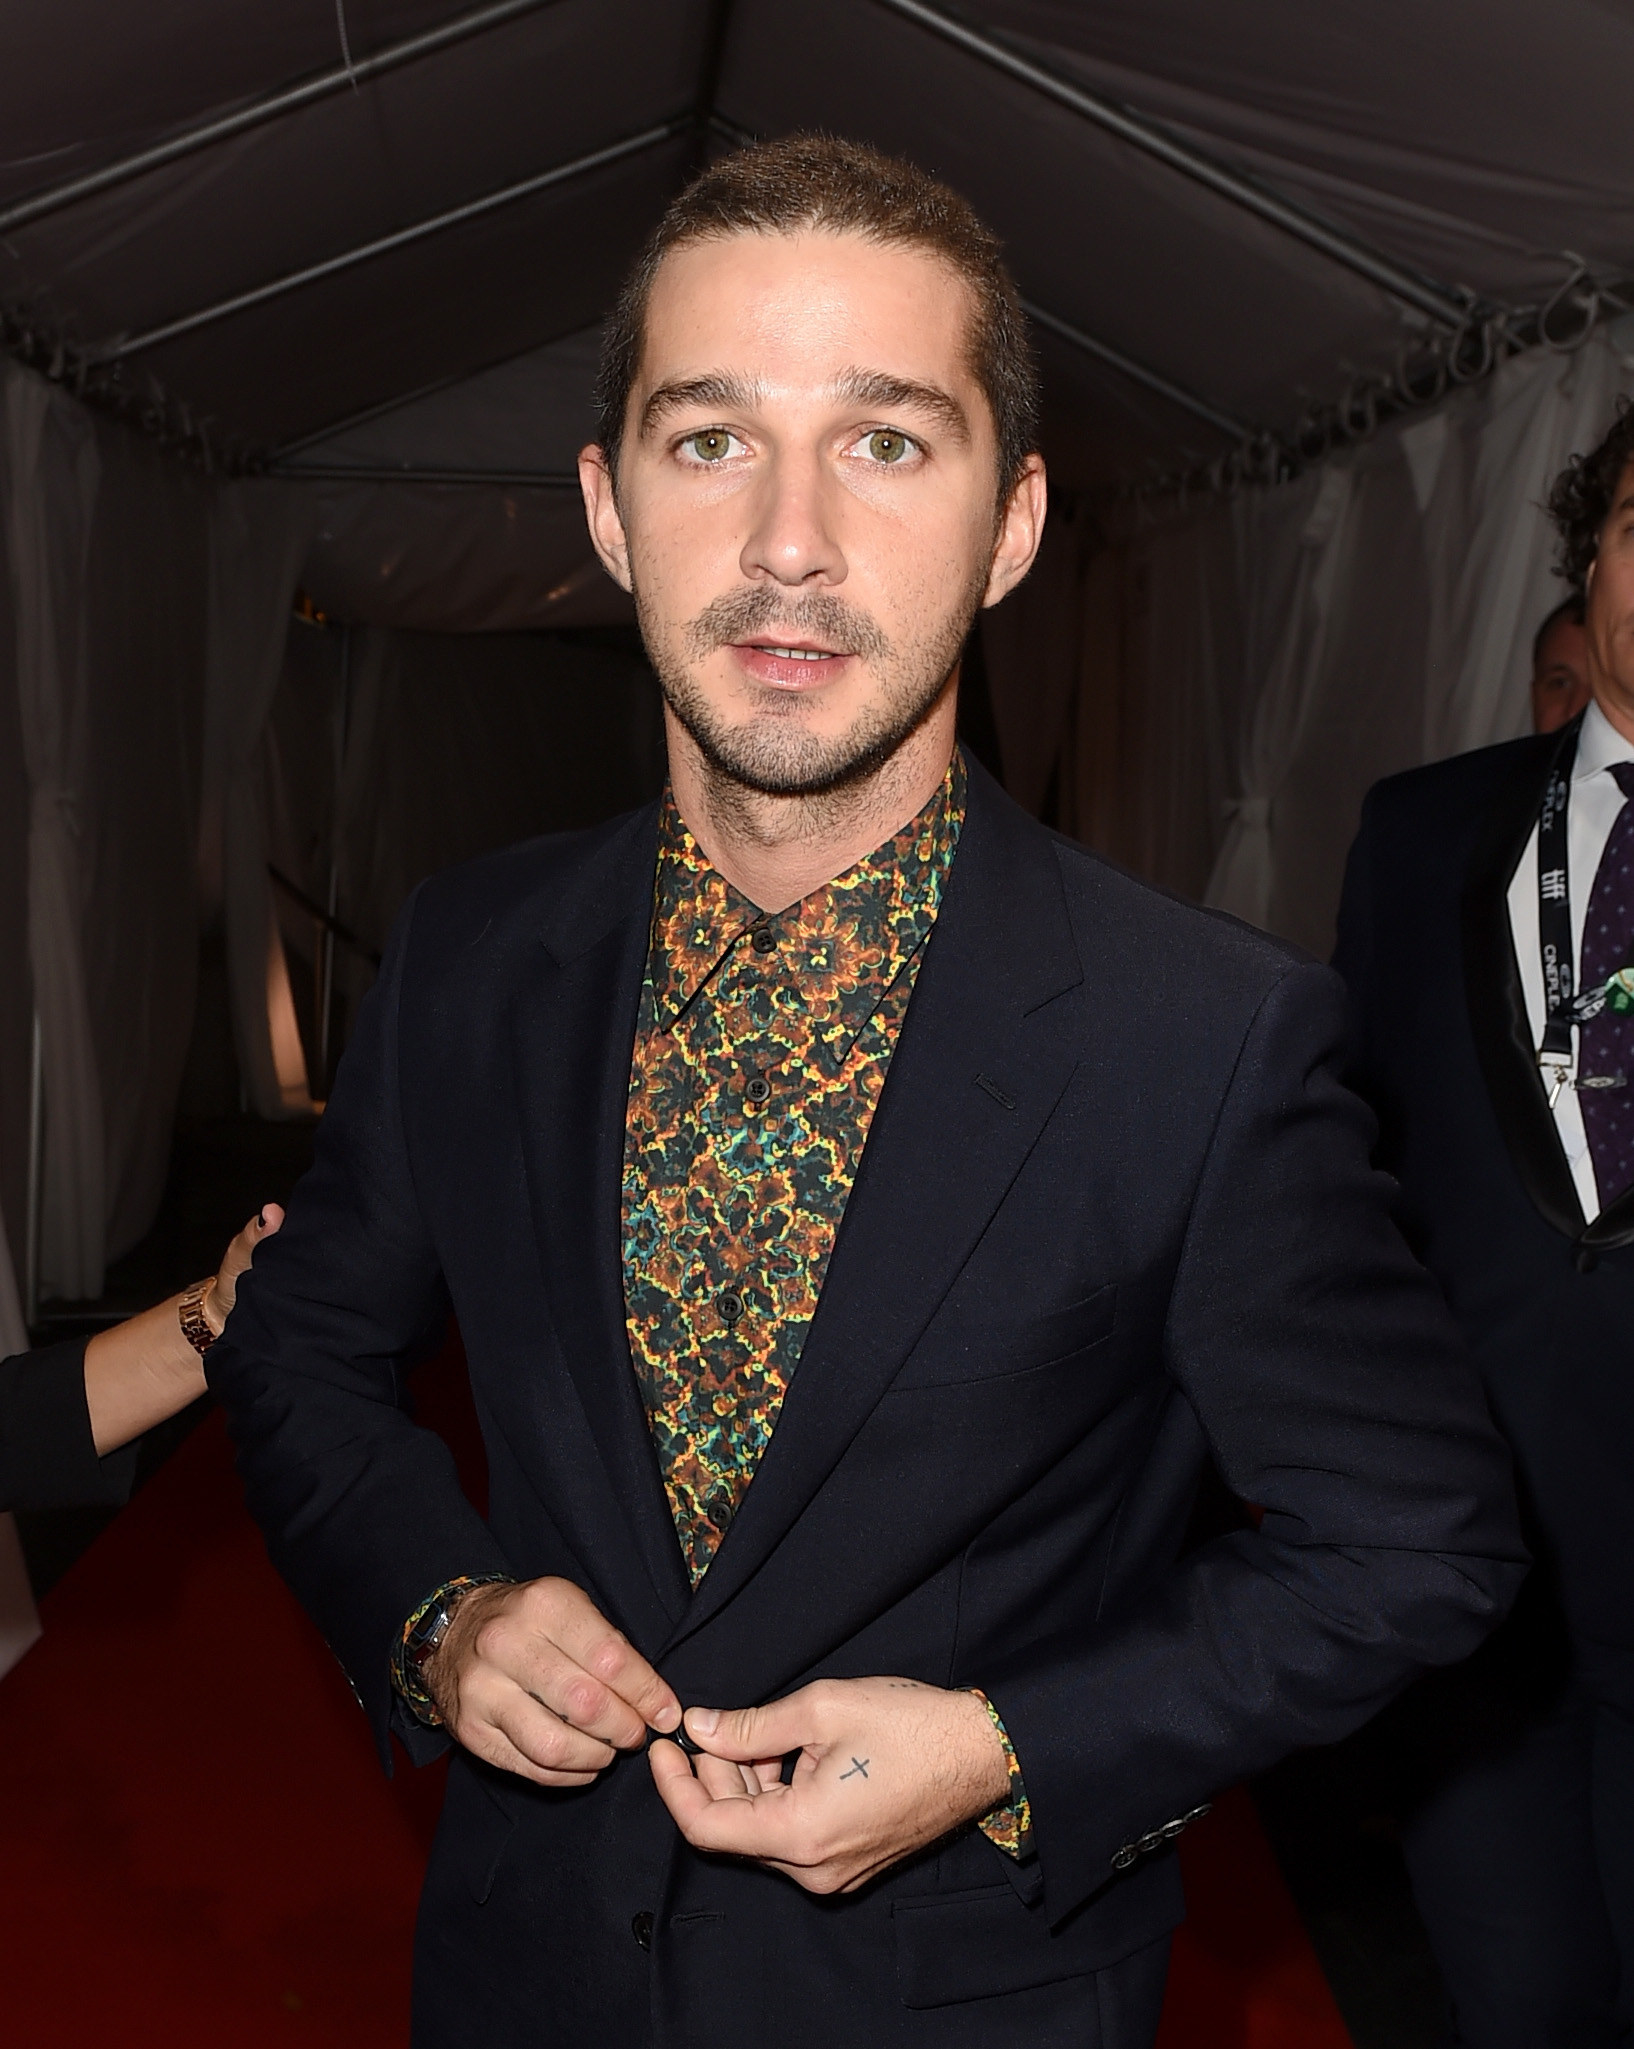 Shia in a suit